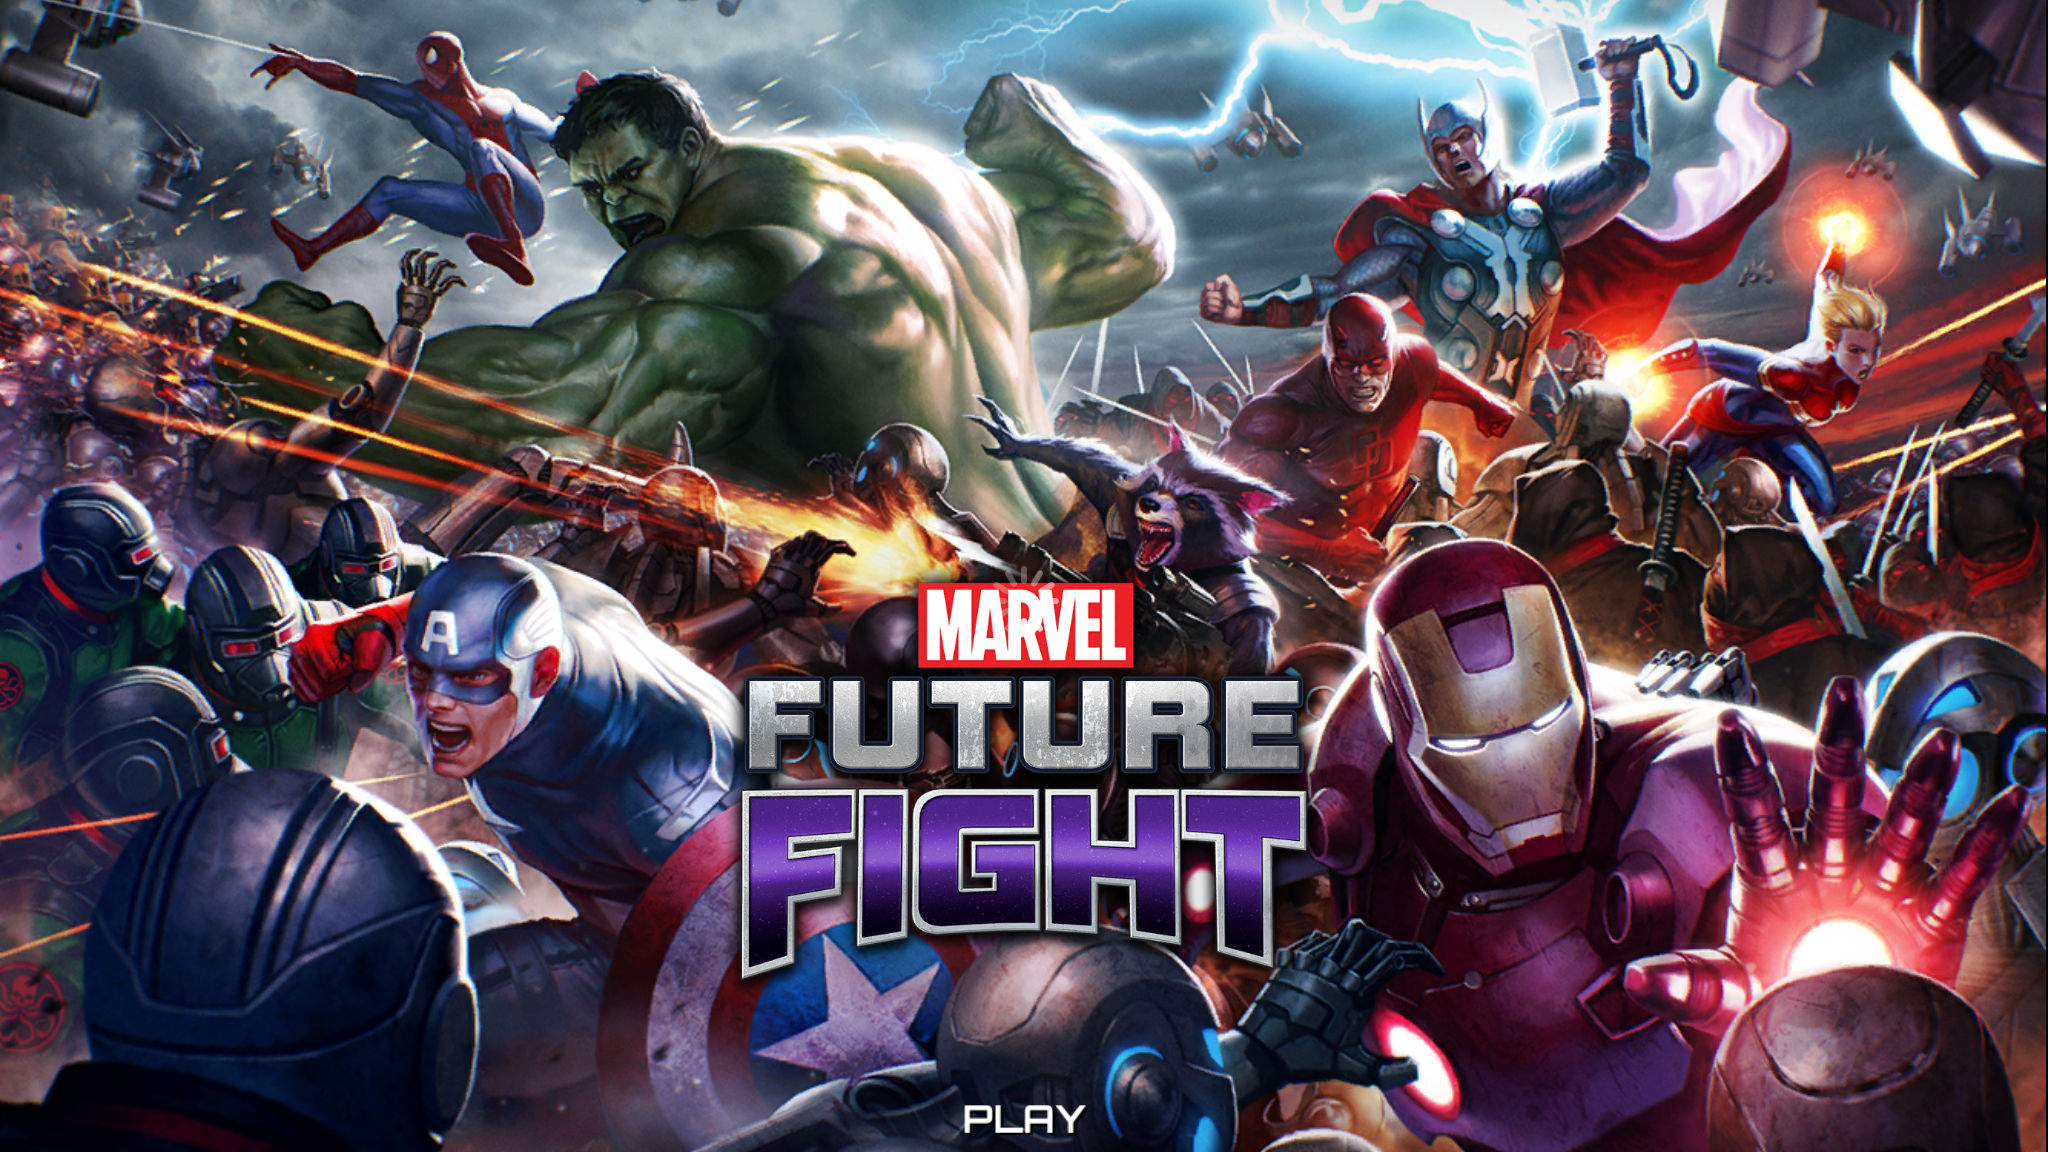 Marvel Future Fight Review: Let’s Punch Bad Guys